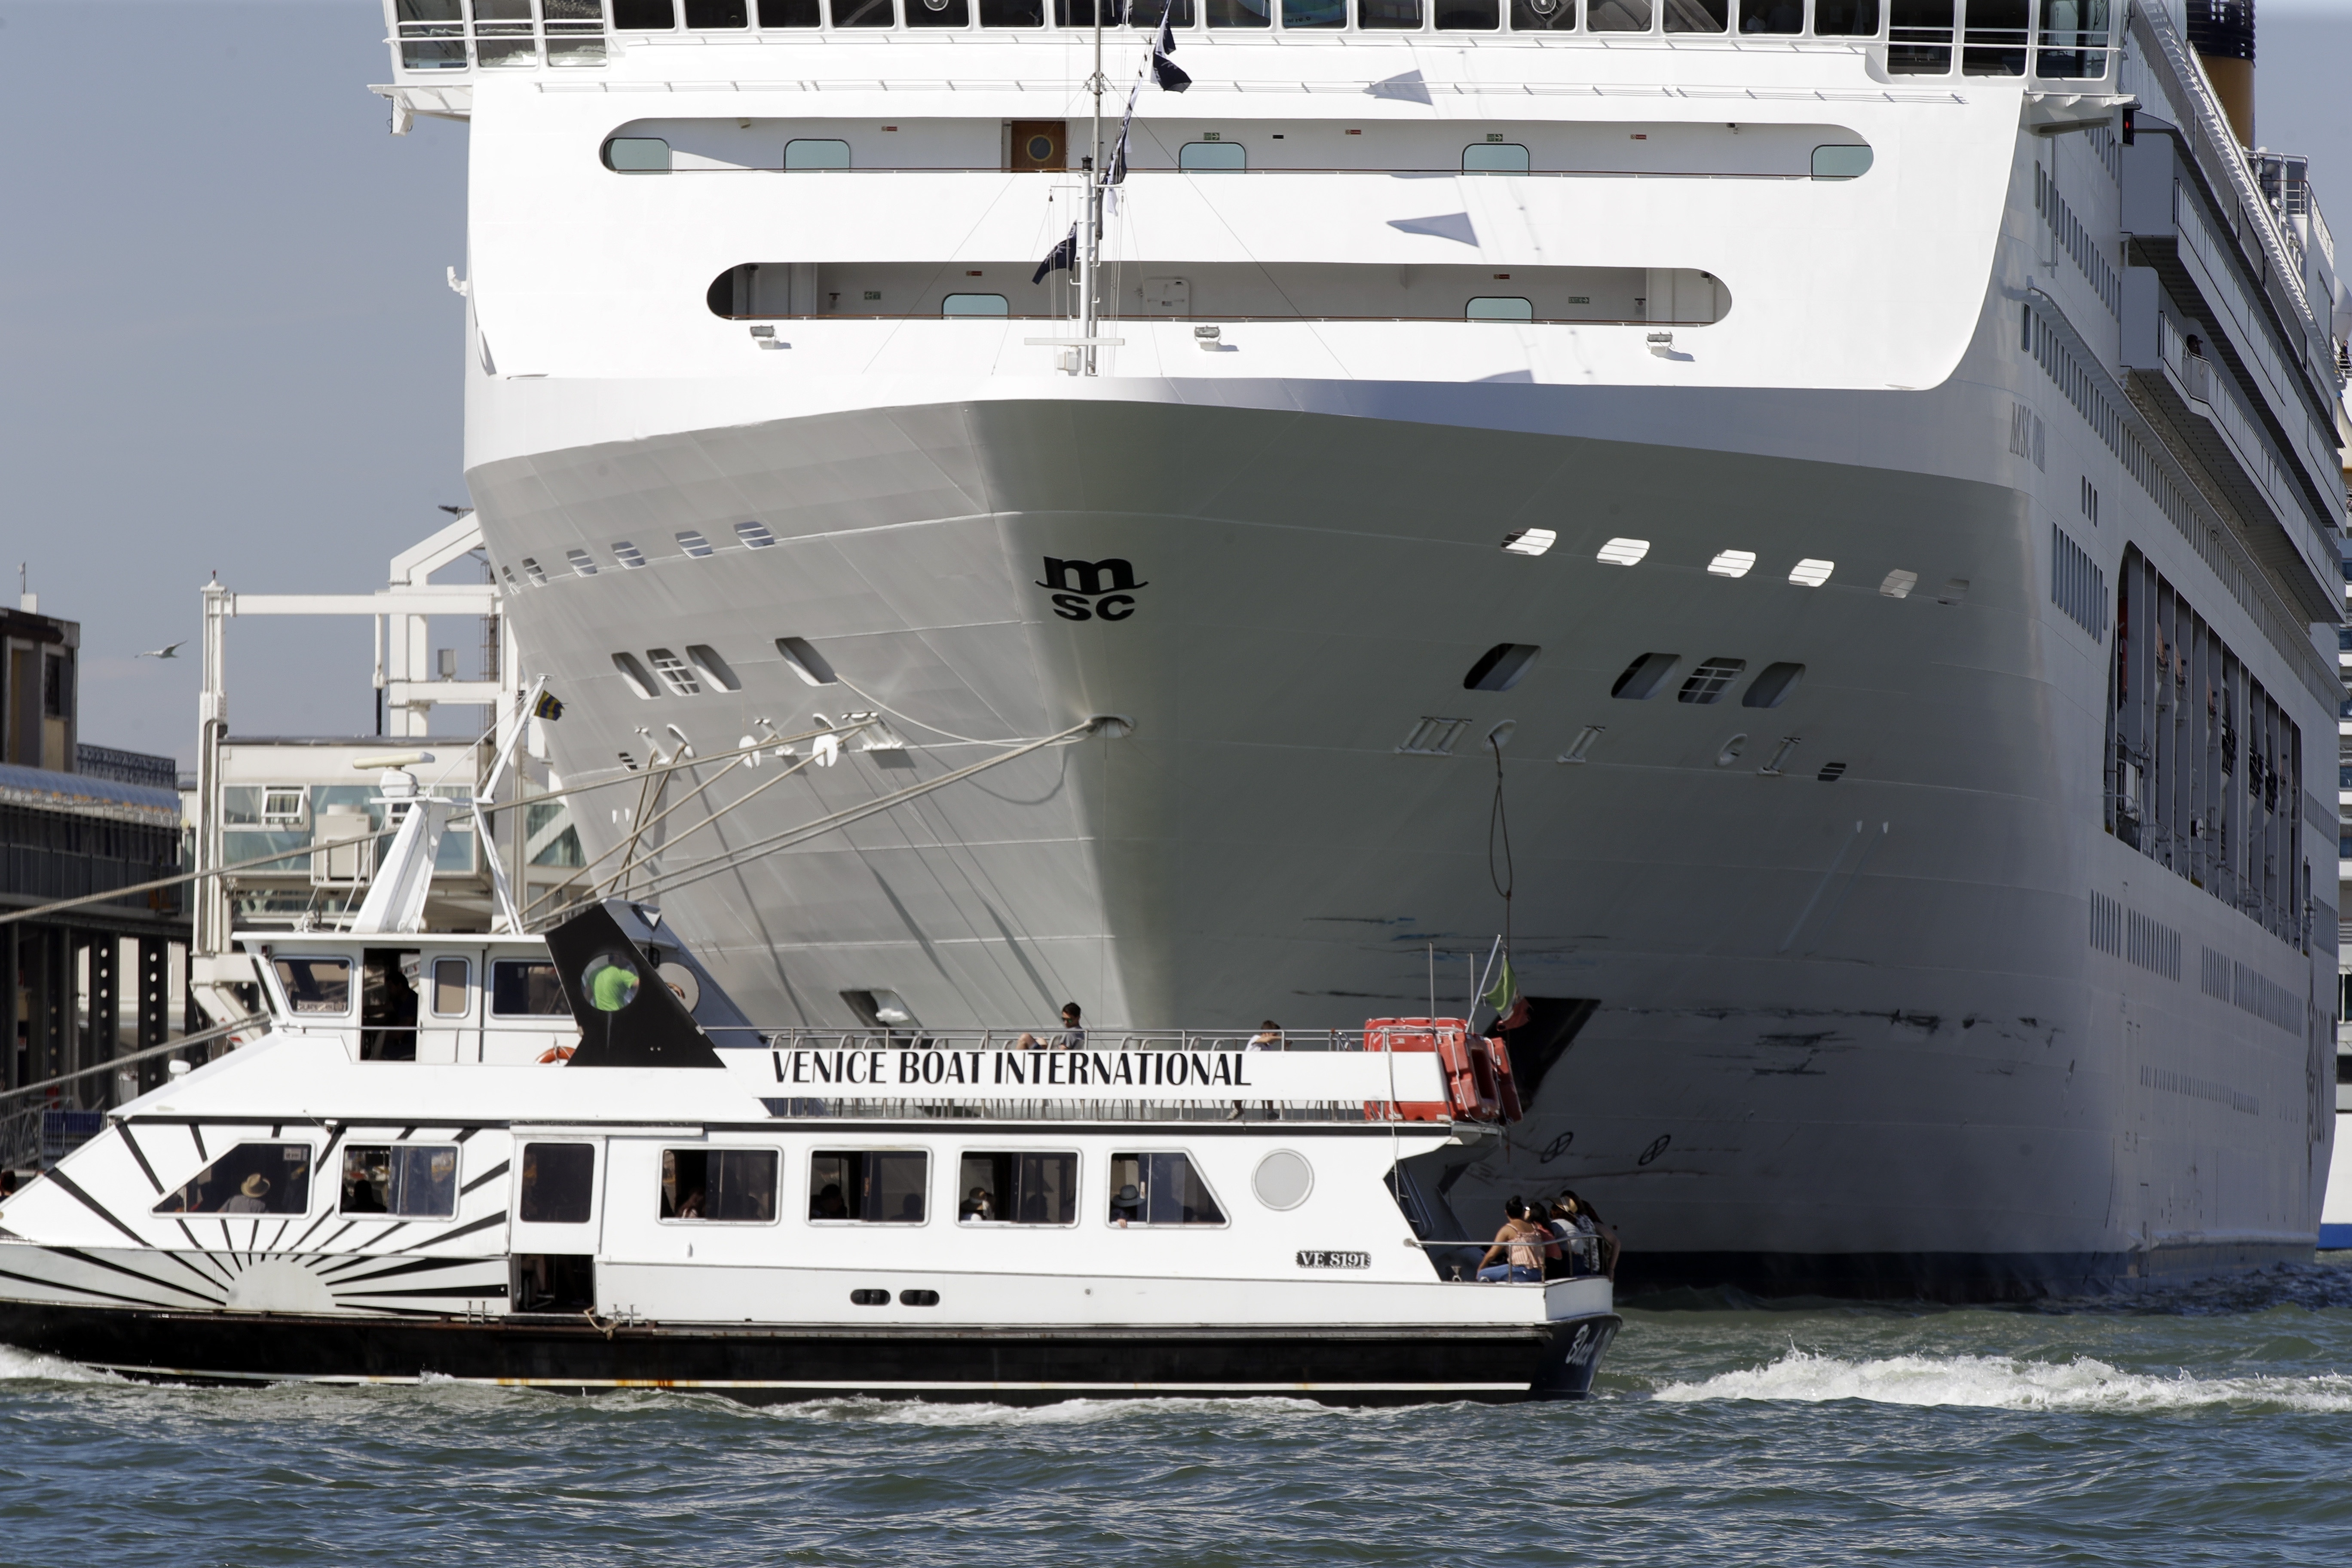 A boat passes by the MSC Opera cruise ship moored at the Venice harbor, Italy, Sunday, June 2, 2019. A towering, out-of-control cruise ship rammed into a dock and a tourist river boat on a busy Venice canal. Italian media reported that at least five people were injured. (AP Photo/Luca Bruno)